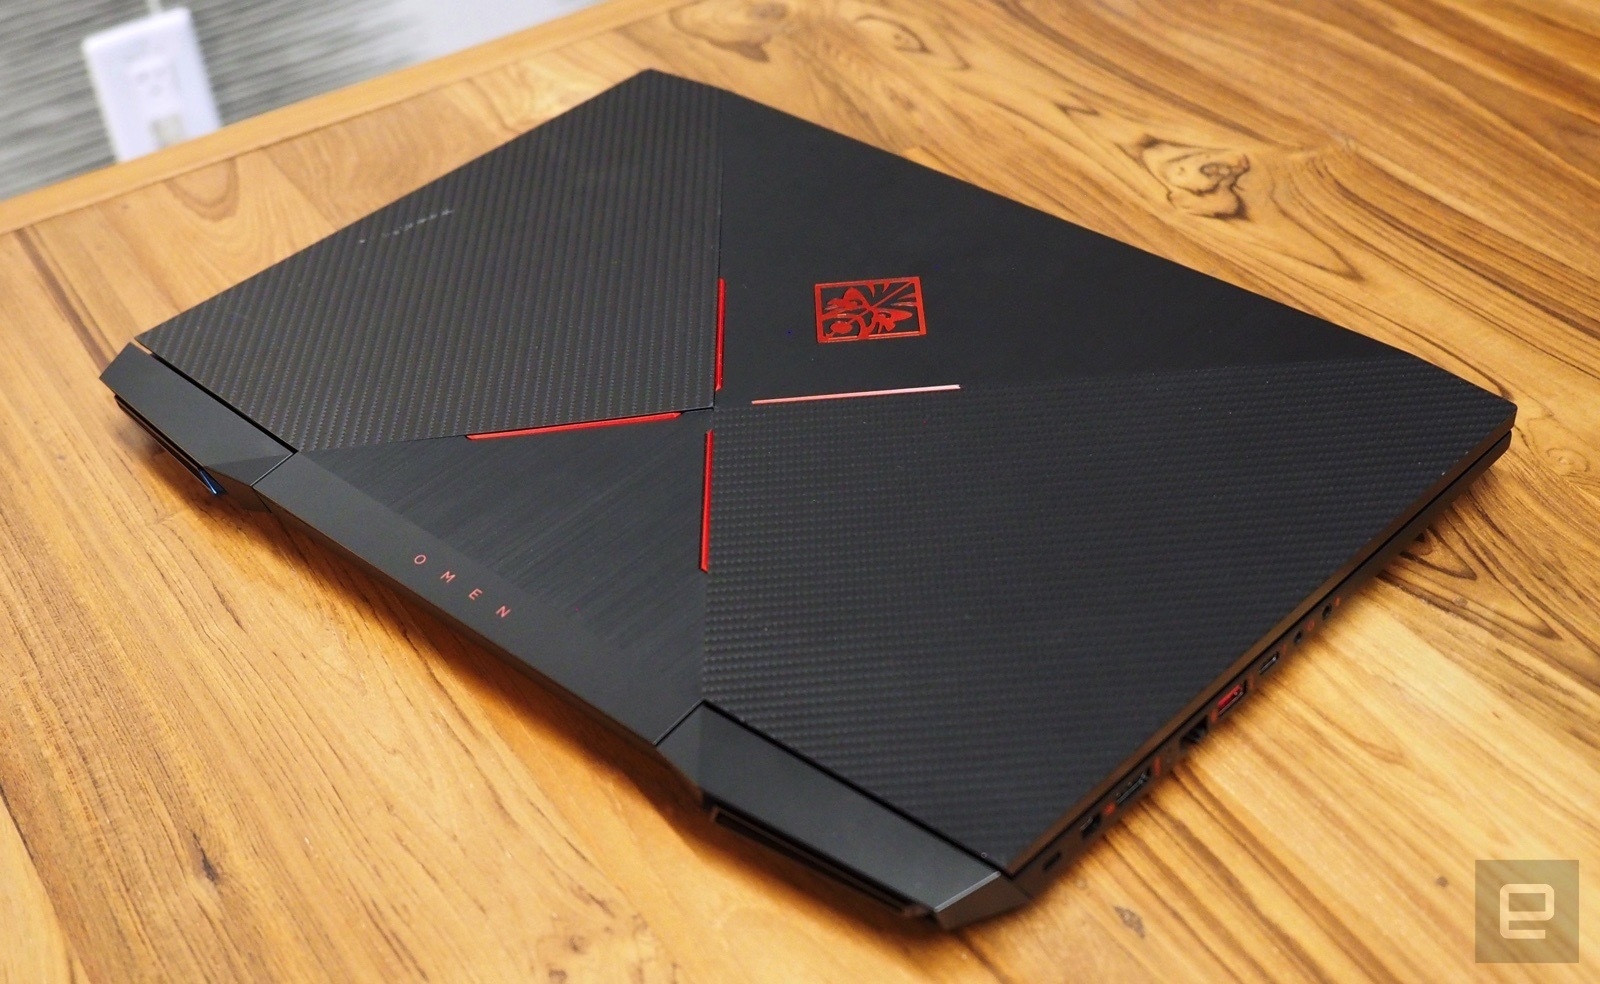 The best lightweight gaming laptops | DeviceDaily.com